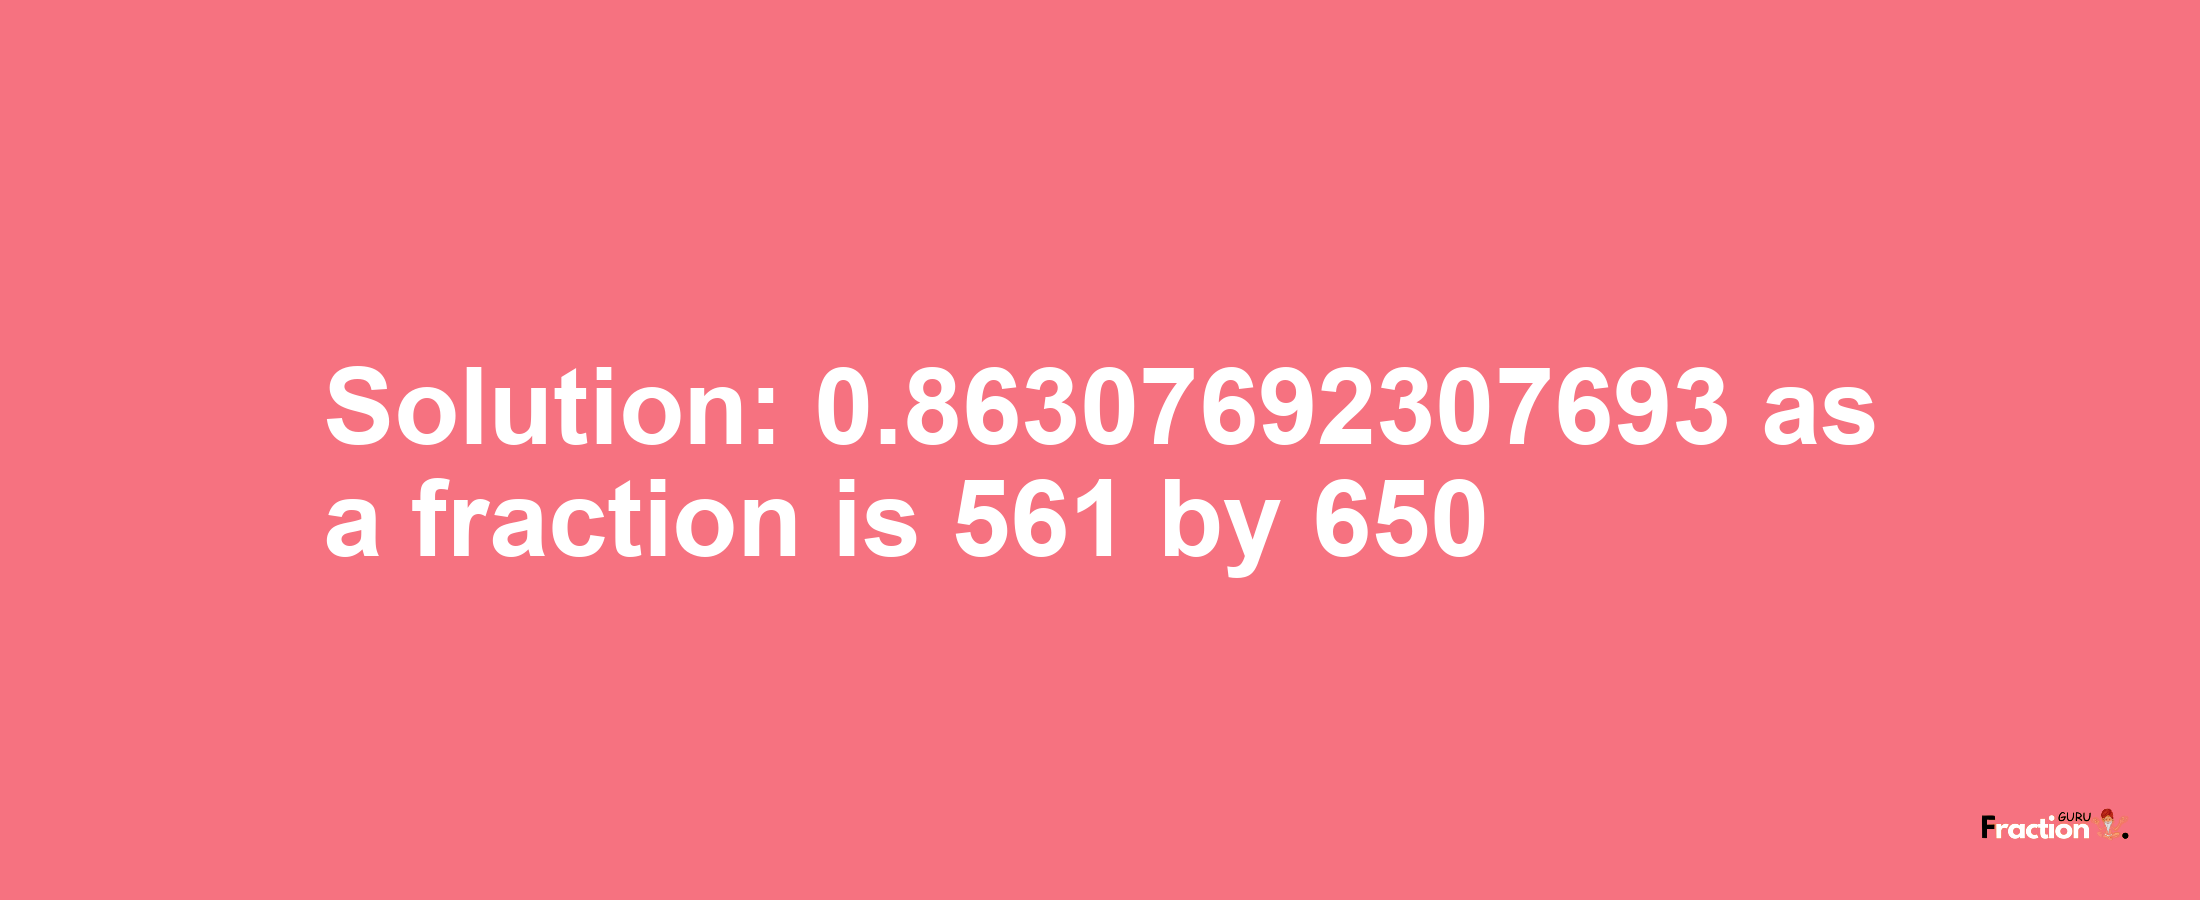 Solution:0.86307692307693 as a fraction is 561/650